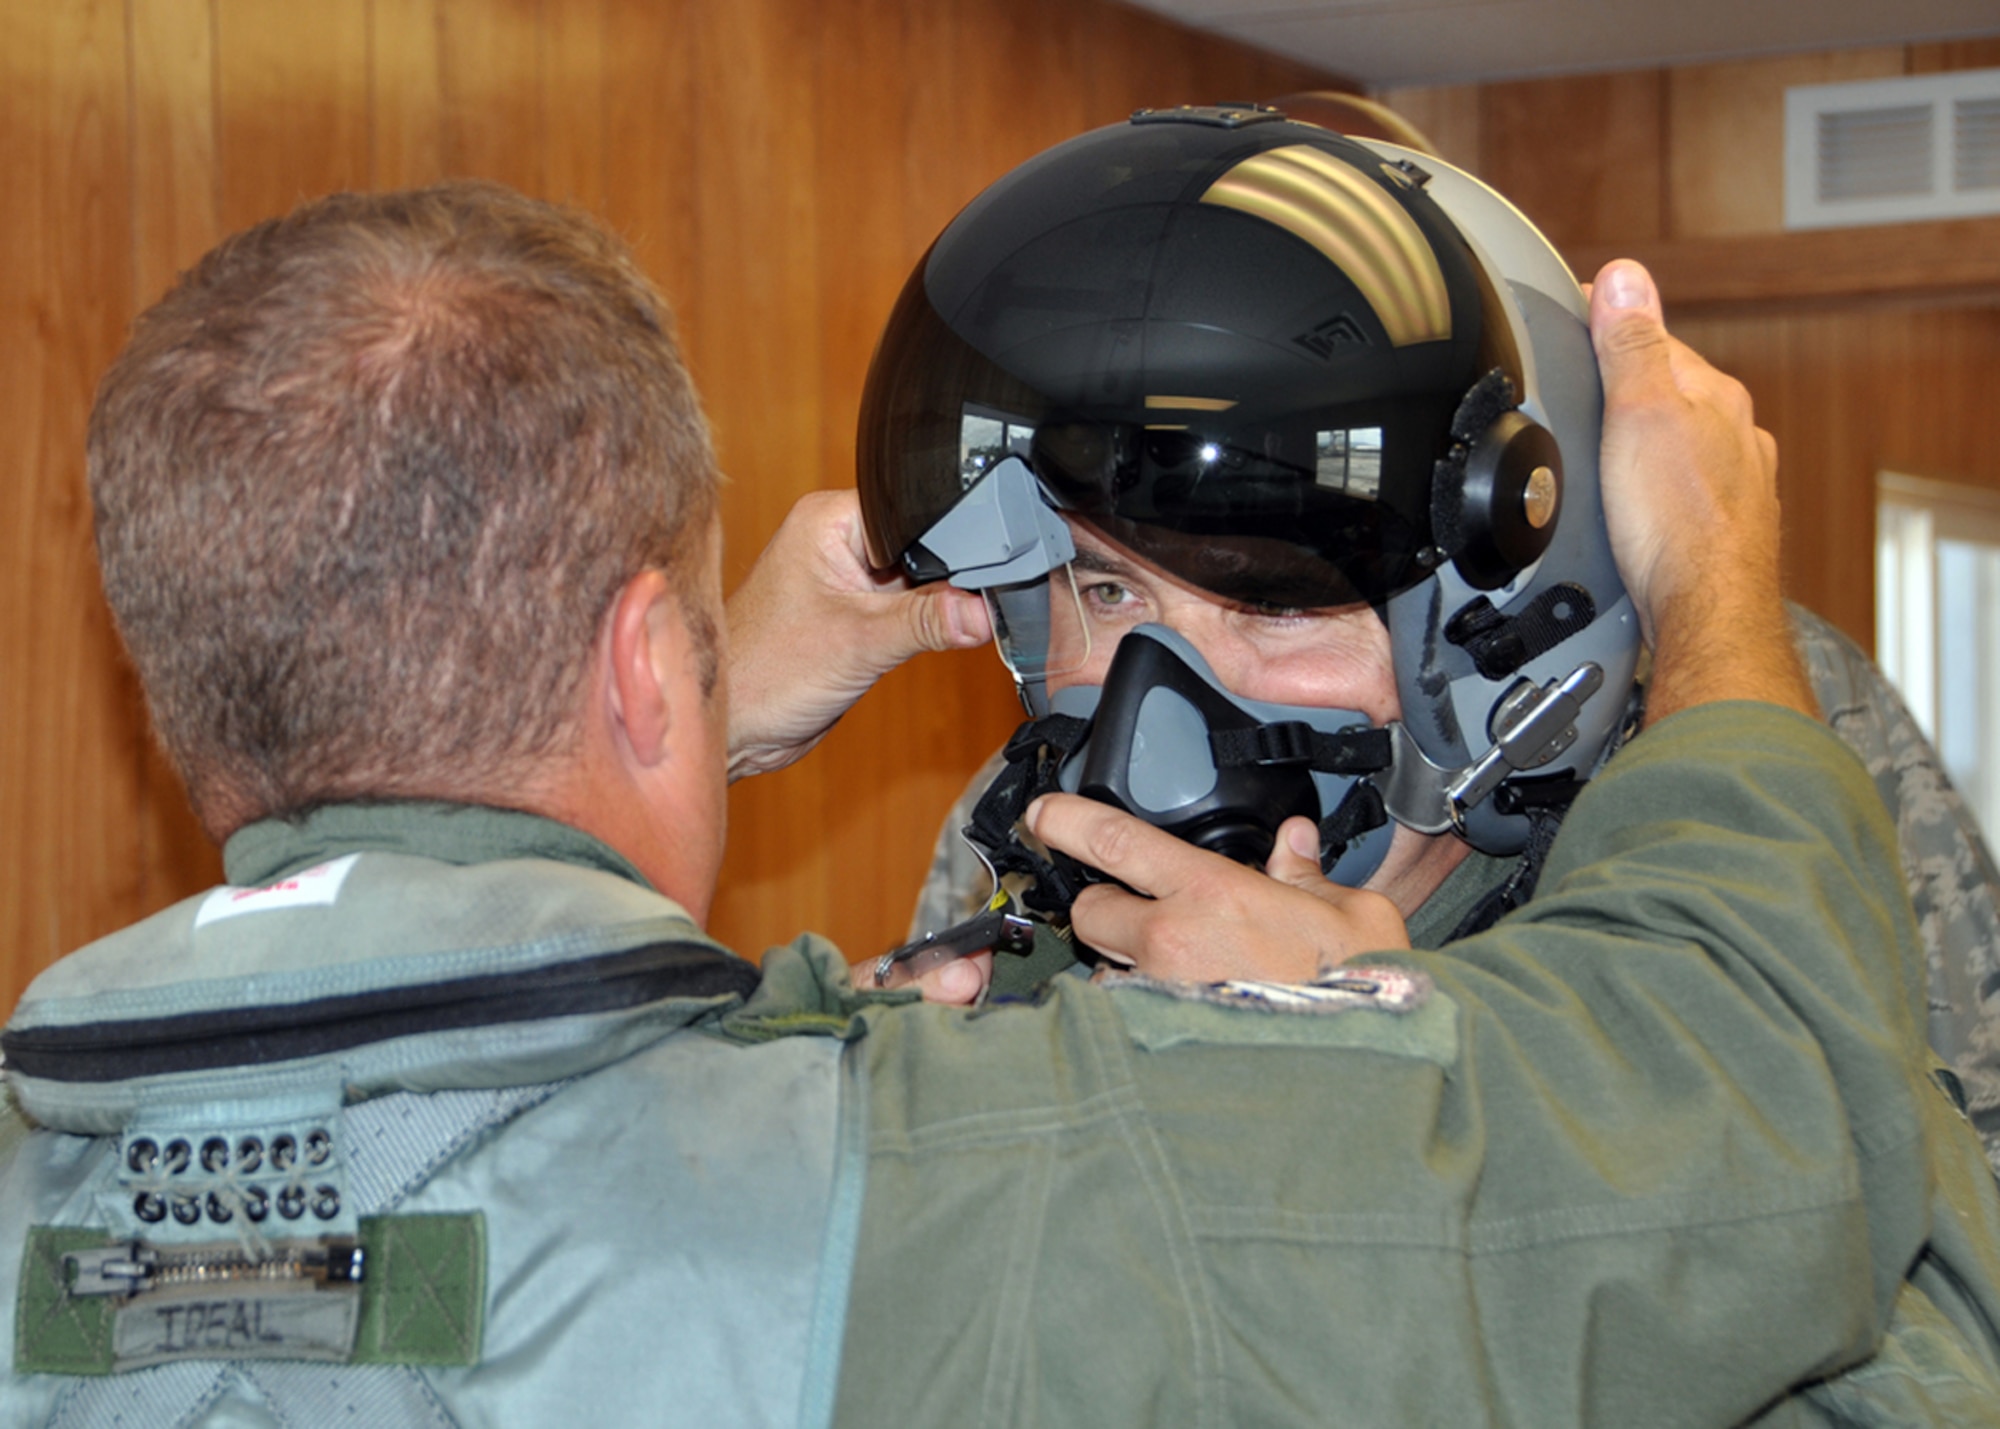 JOINT BASE PEARL HARBOR-HICKAM, Hawaii - U.S. Air Force Lt. Col. Tom McNurlin from the Air National Guard and Air Force Reserve Test Center in Tucson, Ariz., helps U.S. Air Force Col. John Breazeale, 917th Fighter Group commander, adjust his helmet with the Scorpion helmet-mounted system prior to a flight during Rim of the Pacific exercise July 17,2012.  The Scorpion system, along with the Lightweight Airborne Recovery System, known as LARS, was for the first time maritime operationally tested during the exercise. The world's largest international maritime exercise, RIMPAC provides a unique training opportunity that helps participants foster and sustain the cooperative relationships that are critical to ensuring the safety of sea lanes and security on the world's oceans. (U.S. Air Force photo by Master Sgt. Mary Hinson)